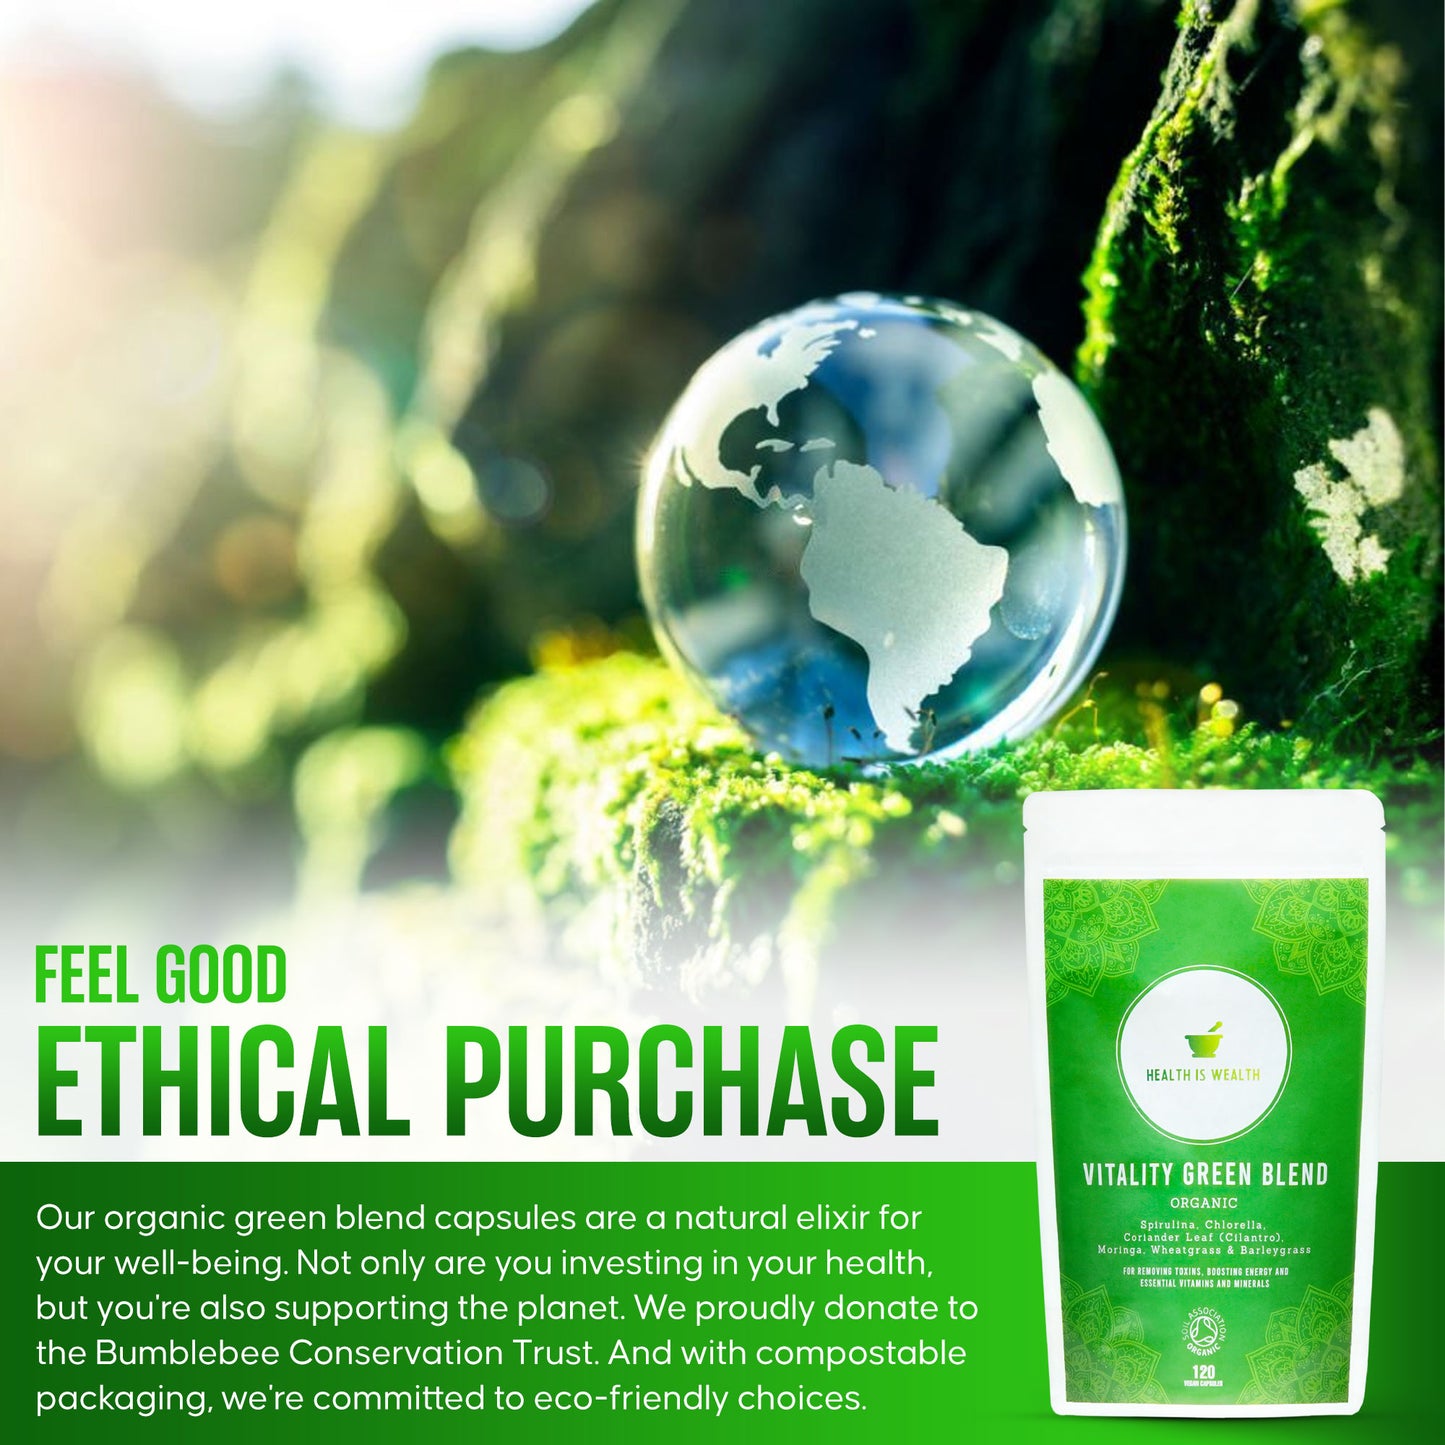 
                  
                    A promotional graphic for Health is Wealth's organic vitality green blend capsules, highlighting eco-friendly packaging and support for the Bumblebee Conservation Trust, set against a natural backdrop with a glass globe on moss
                  
                